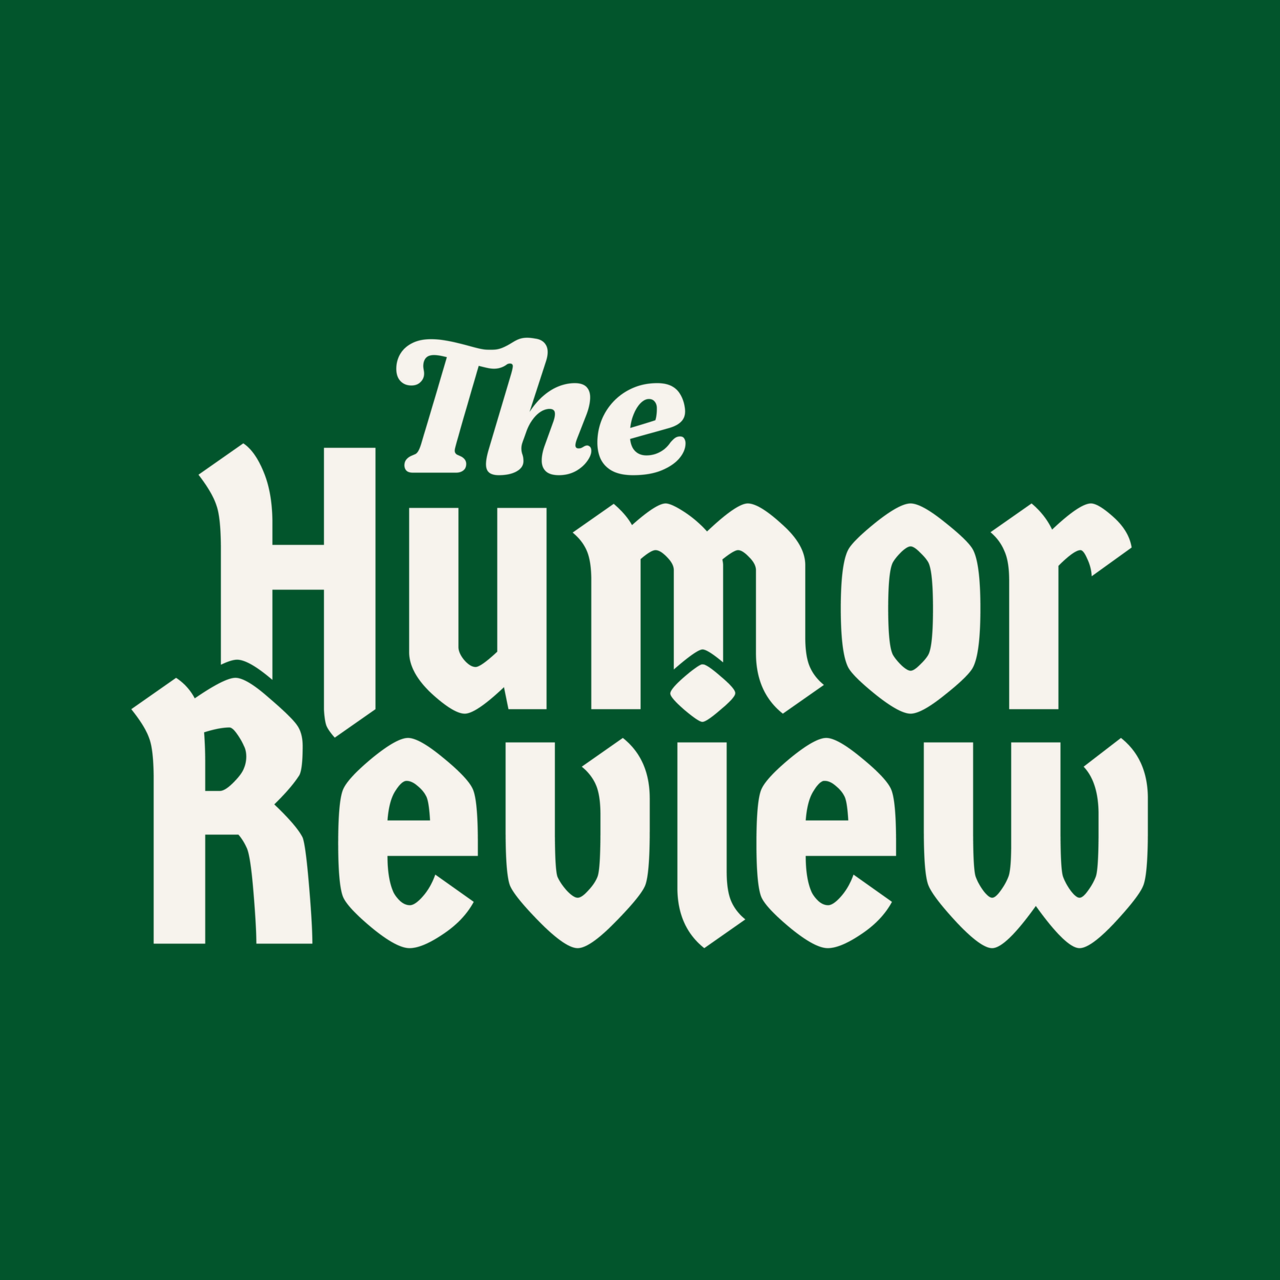 Artwork for The Humor Review